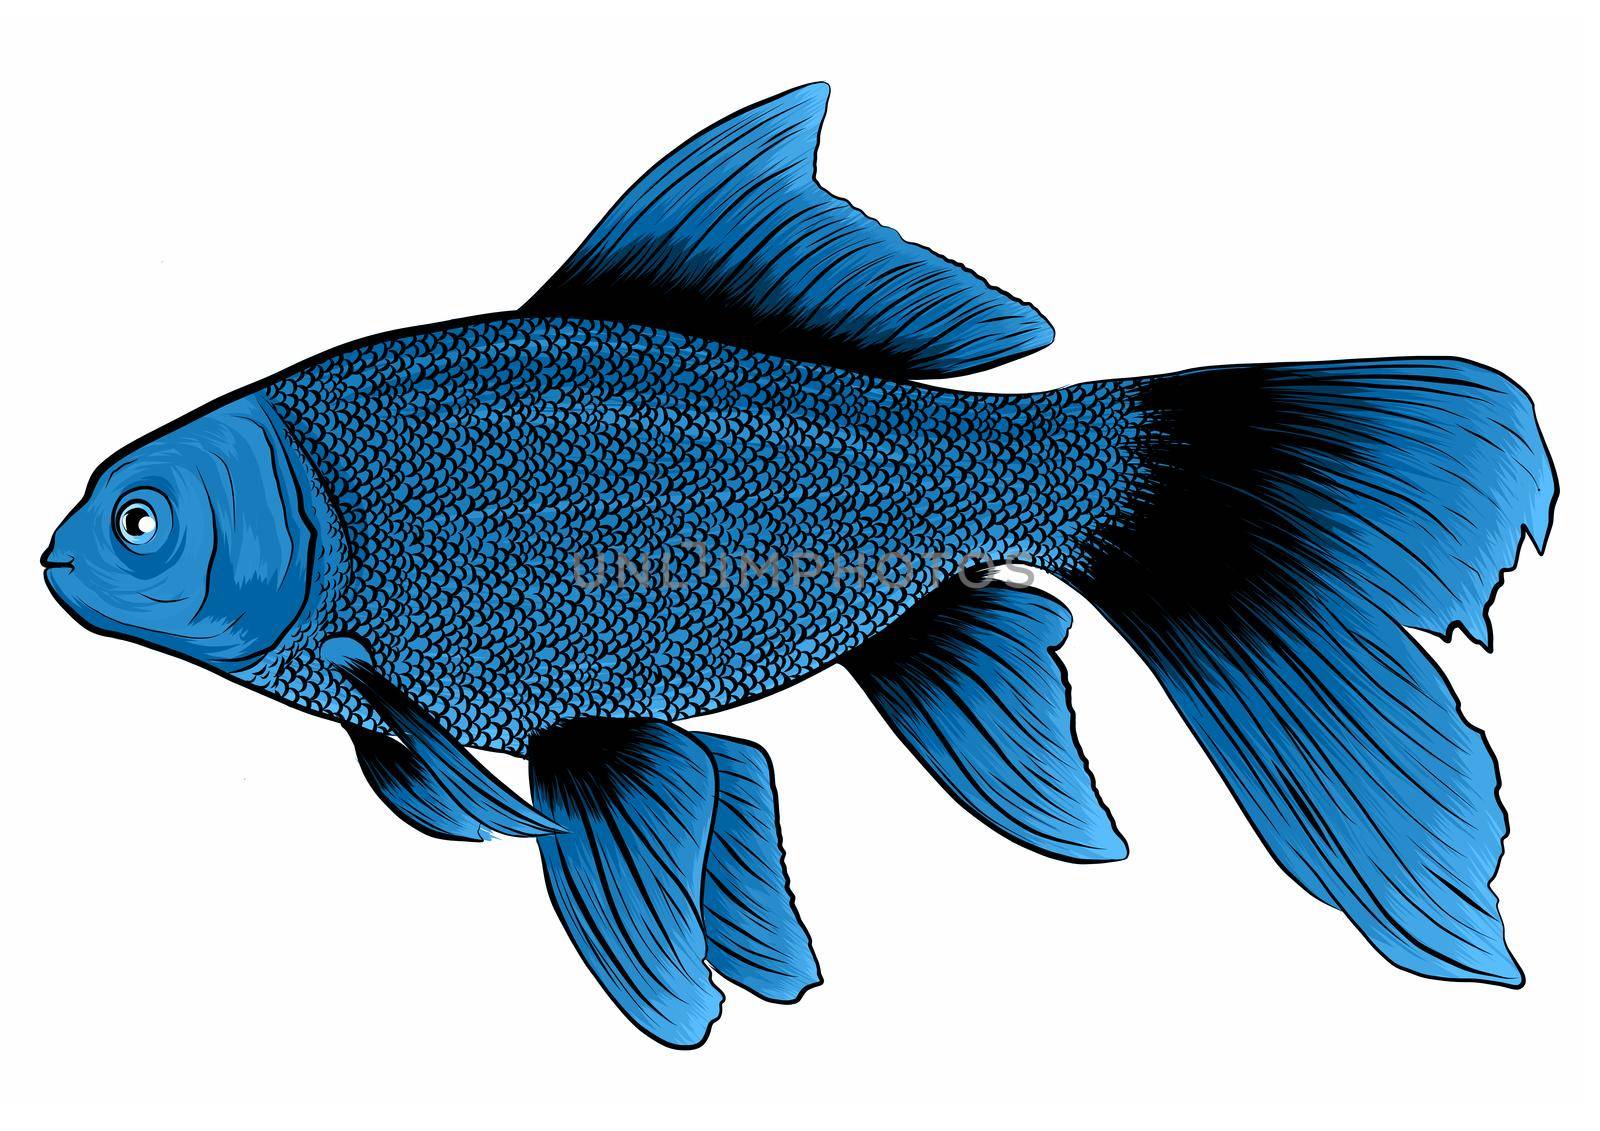 bluefish. illustration with refined details by dean